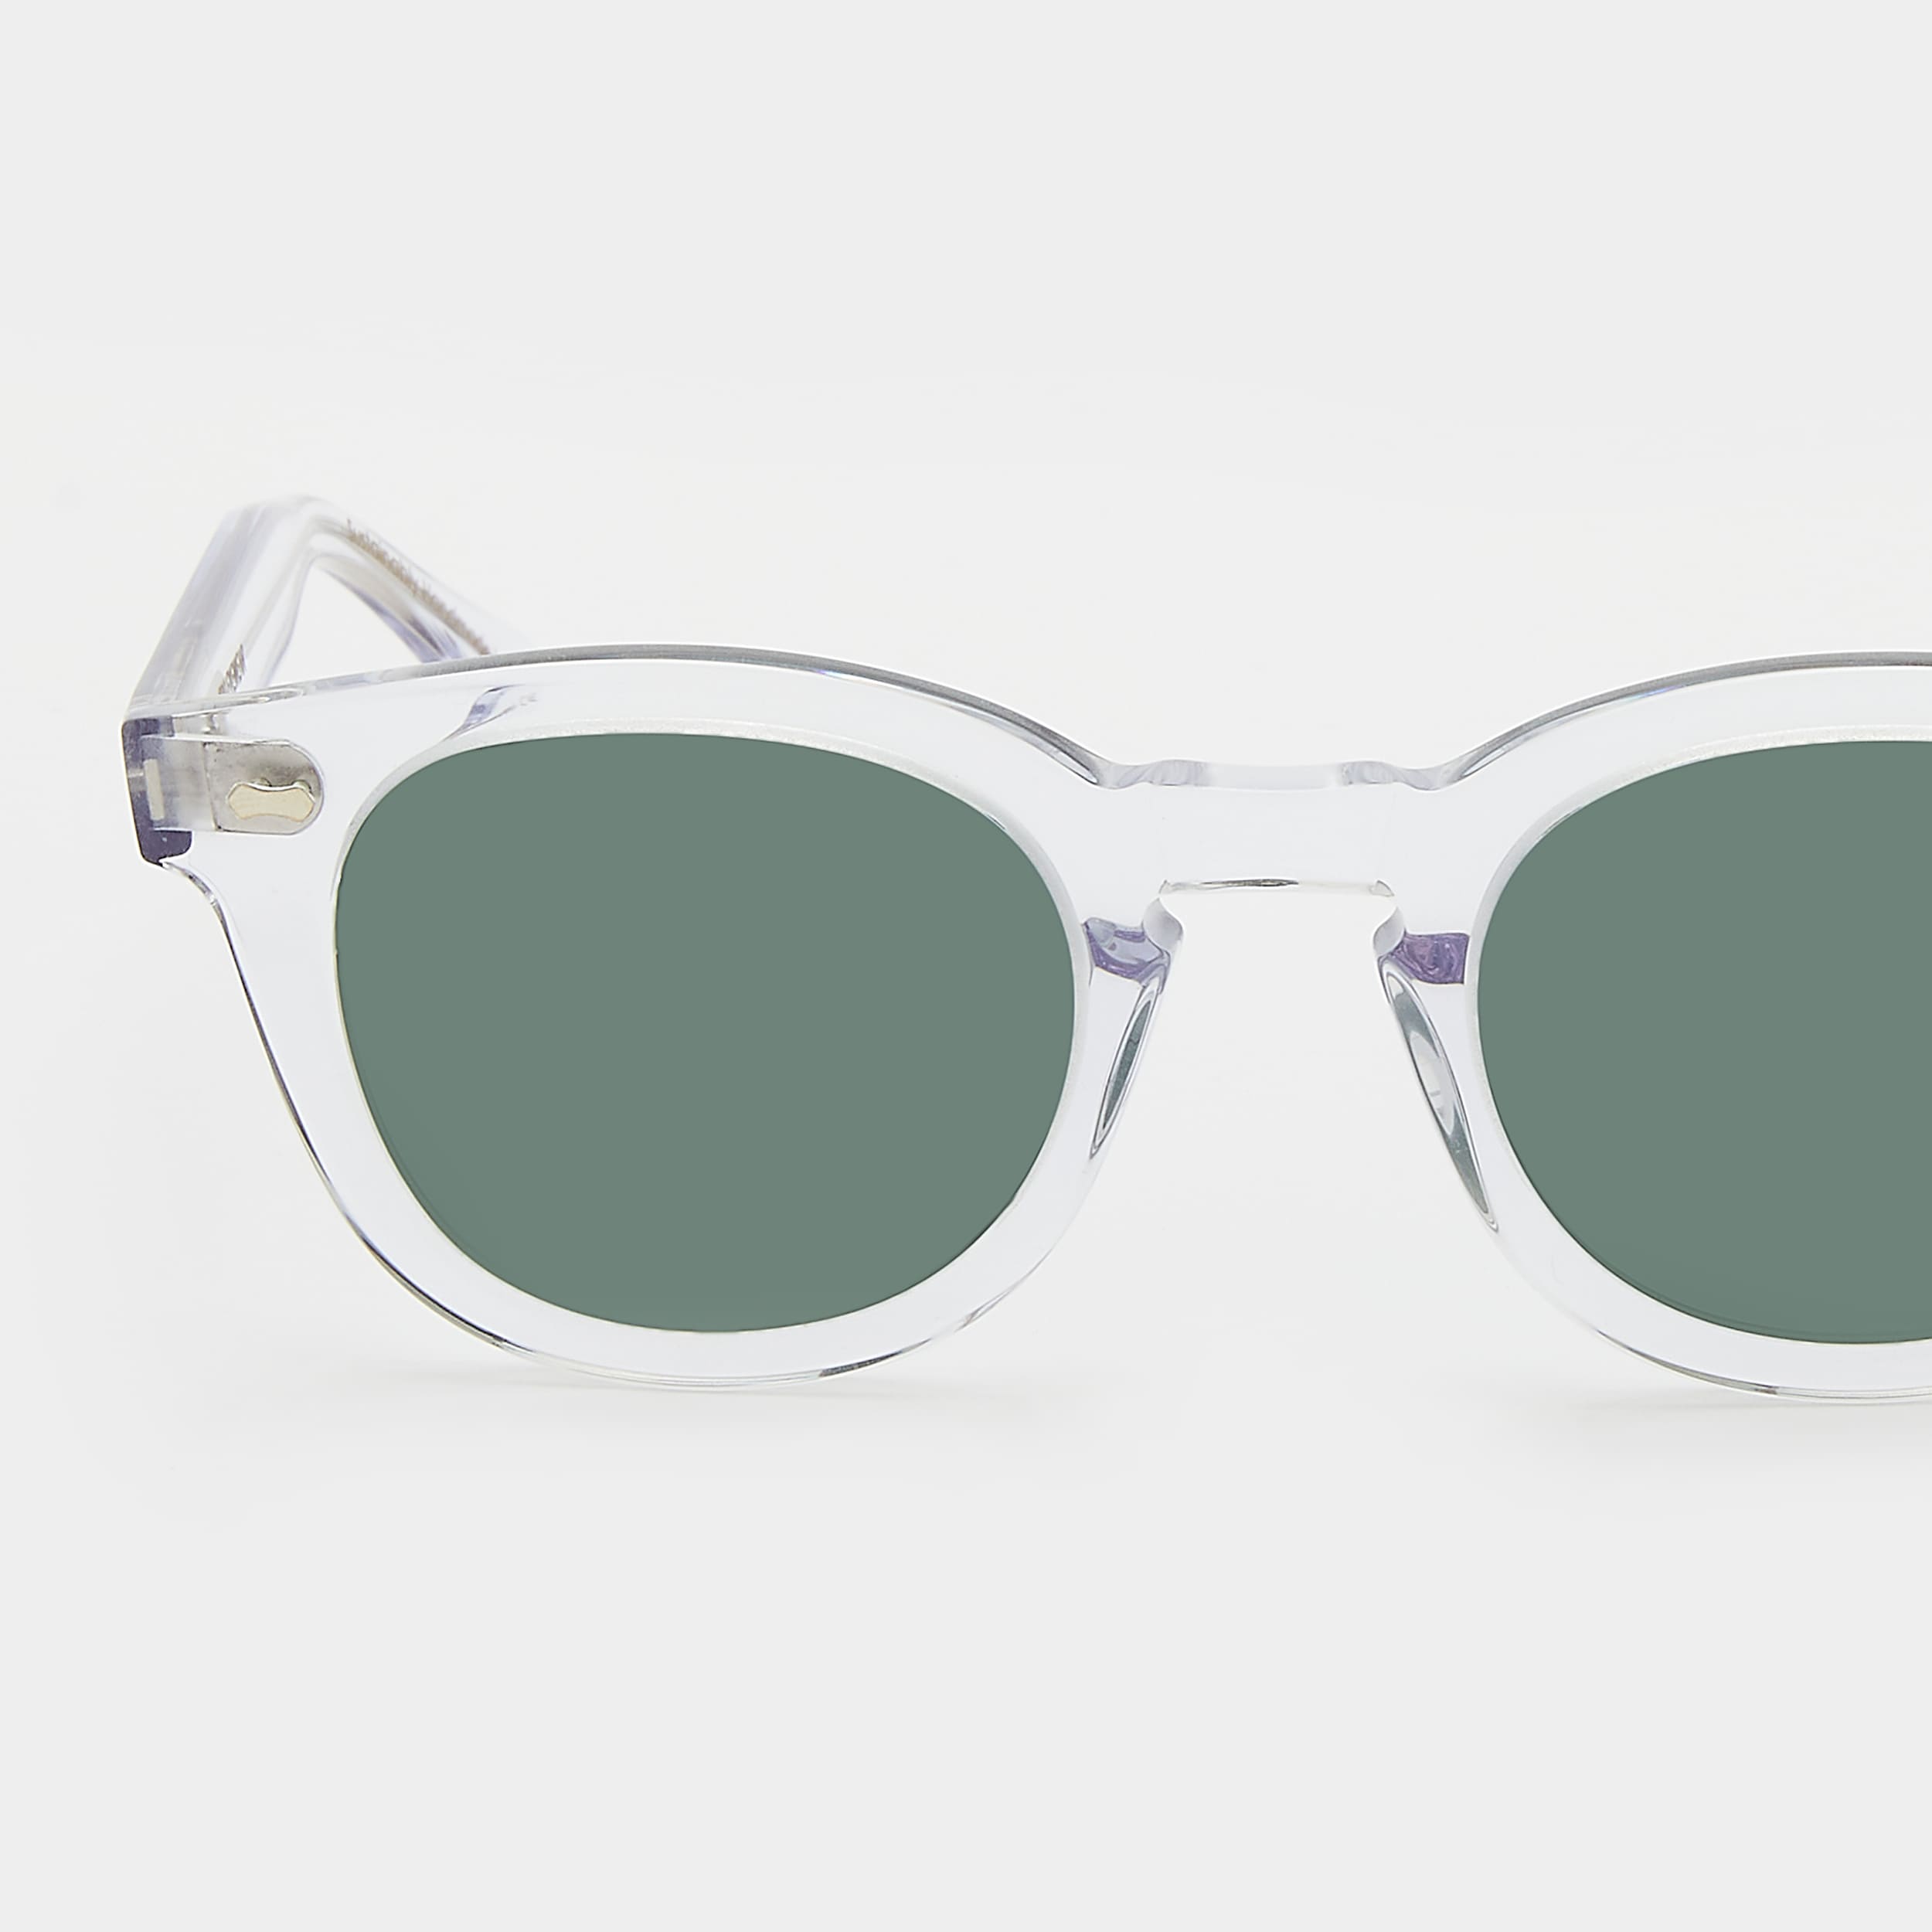 sunglasses-donegal-eco-transparent-bottle-green-sustainable-tbd-eyewear-lens